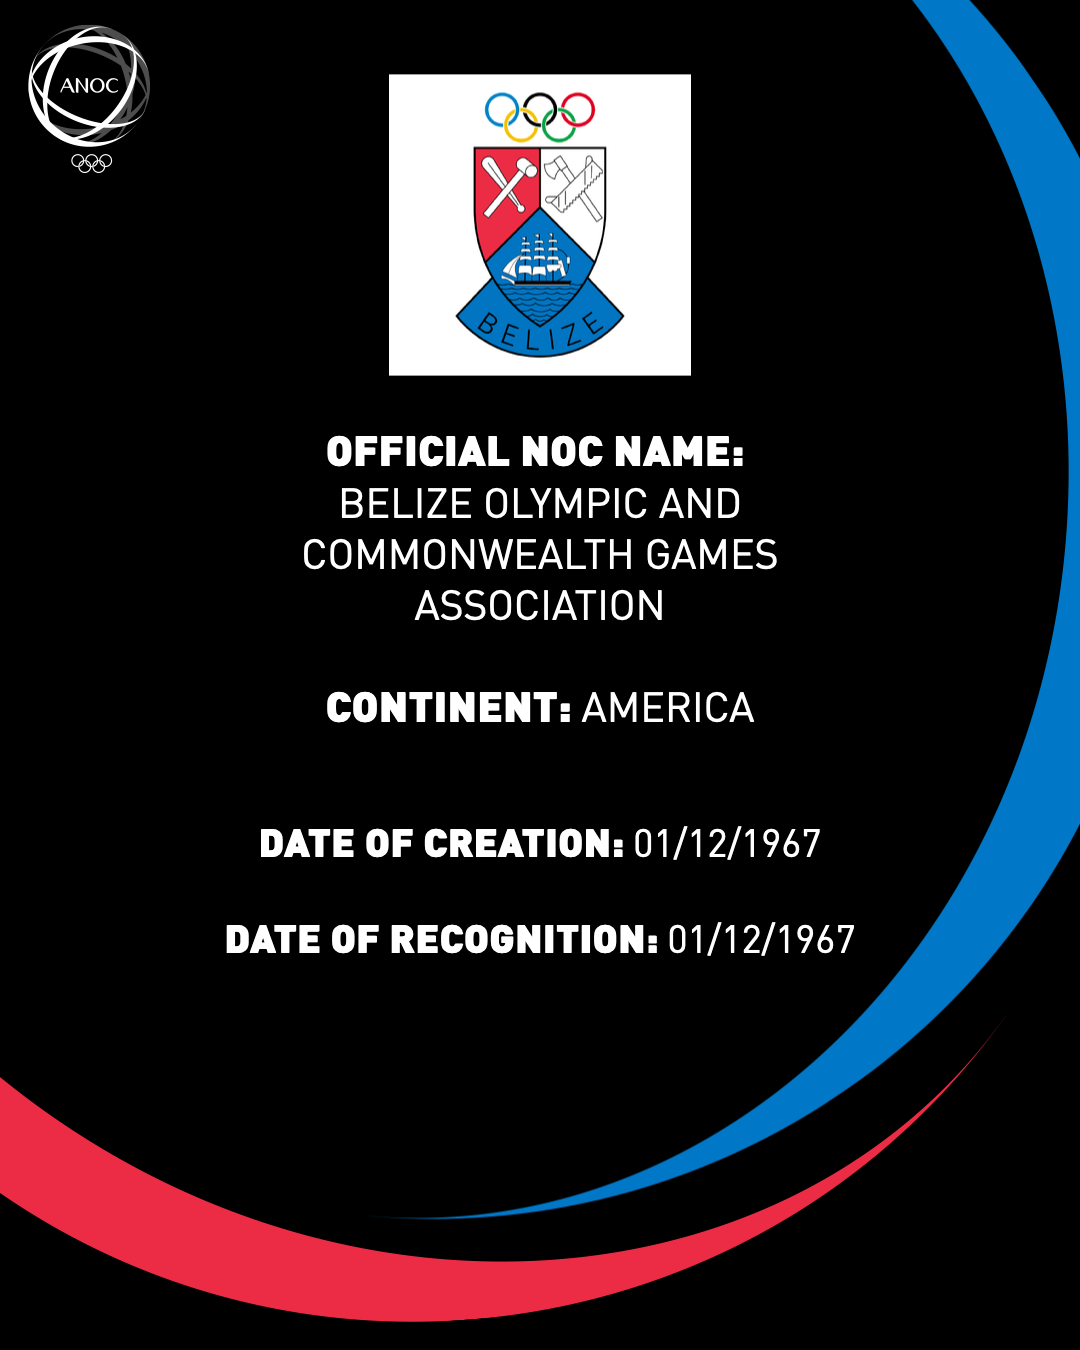 Belize Olympic and Commonwealth Games Association